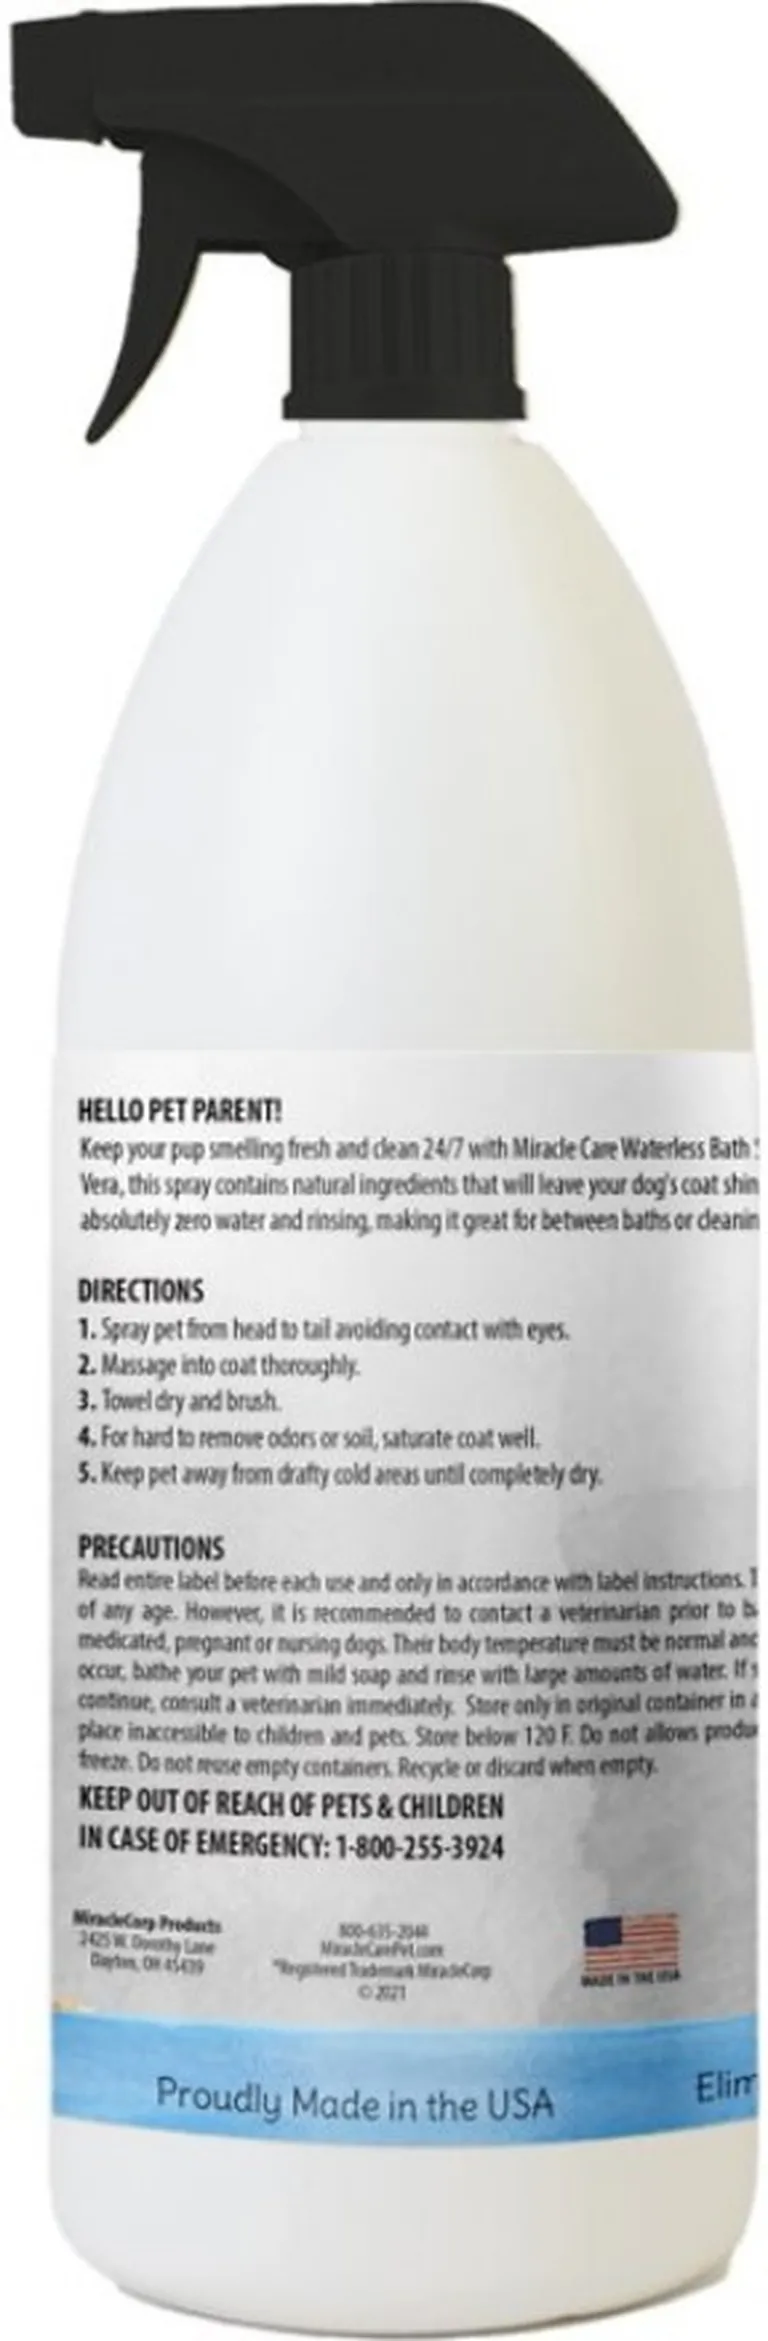 Miracle Care Waterless Bath Spray for Dogs and Cats Photo 3